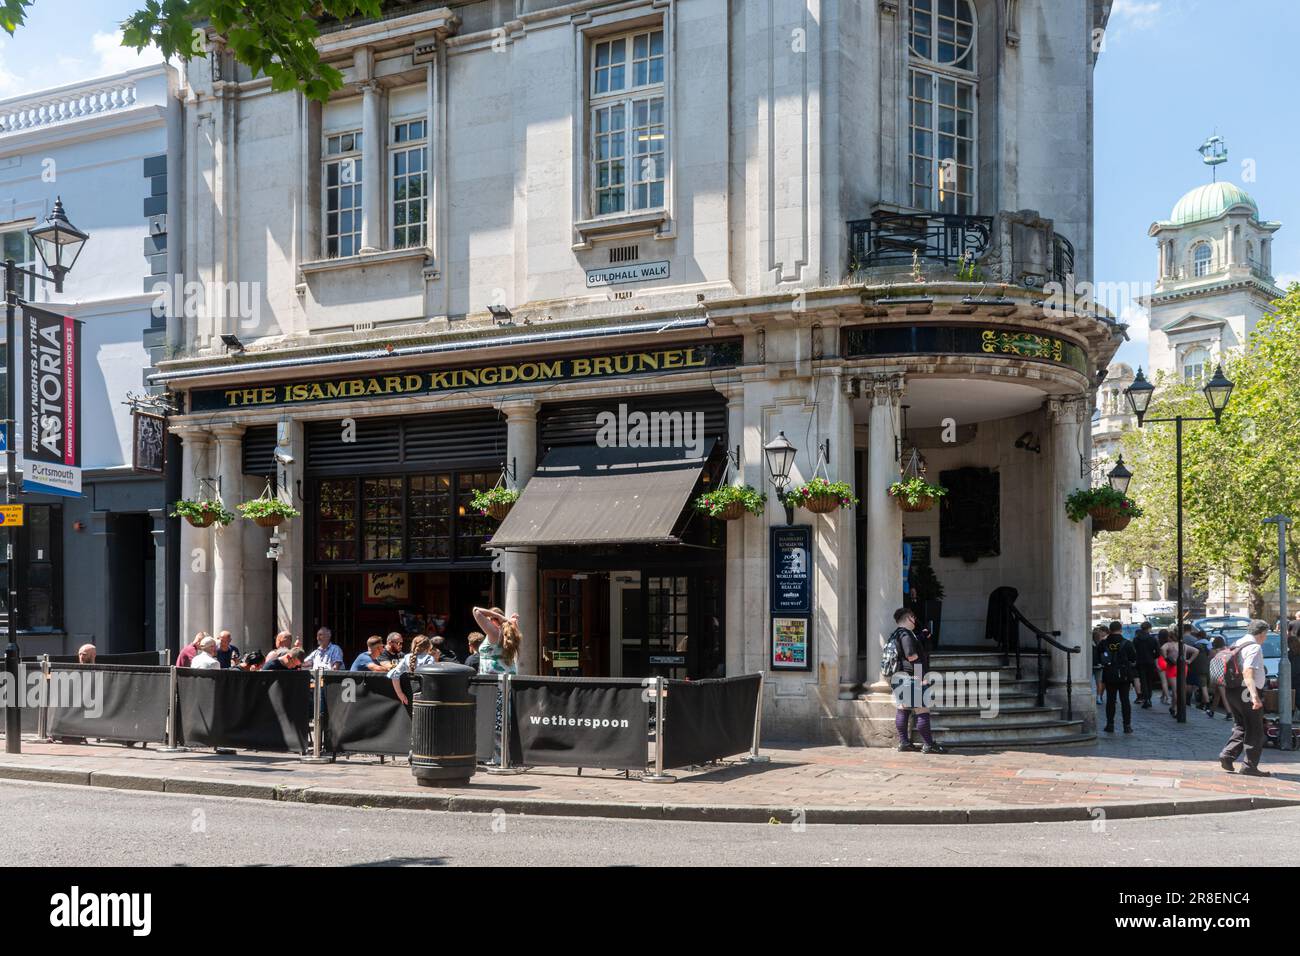 The Isambard Kingdom Brunel, a popular Wetherspoon pub in Portsmouth, Hampshire,England, UK, with people sitting outside having drinks Stock Photo